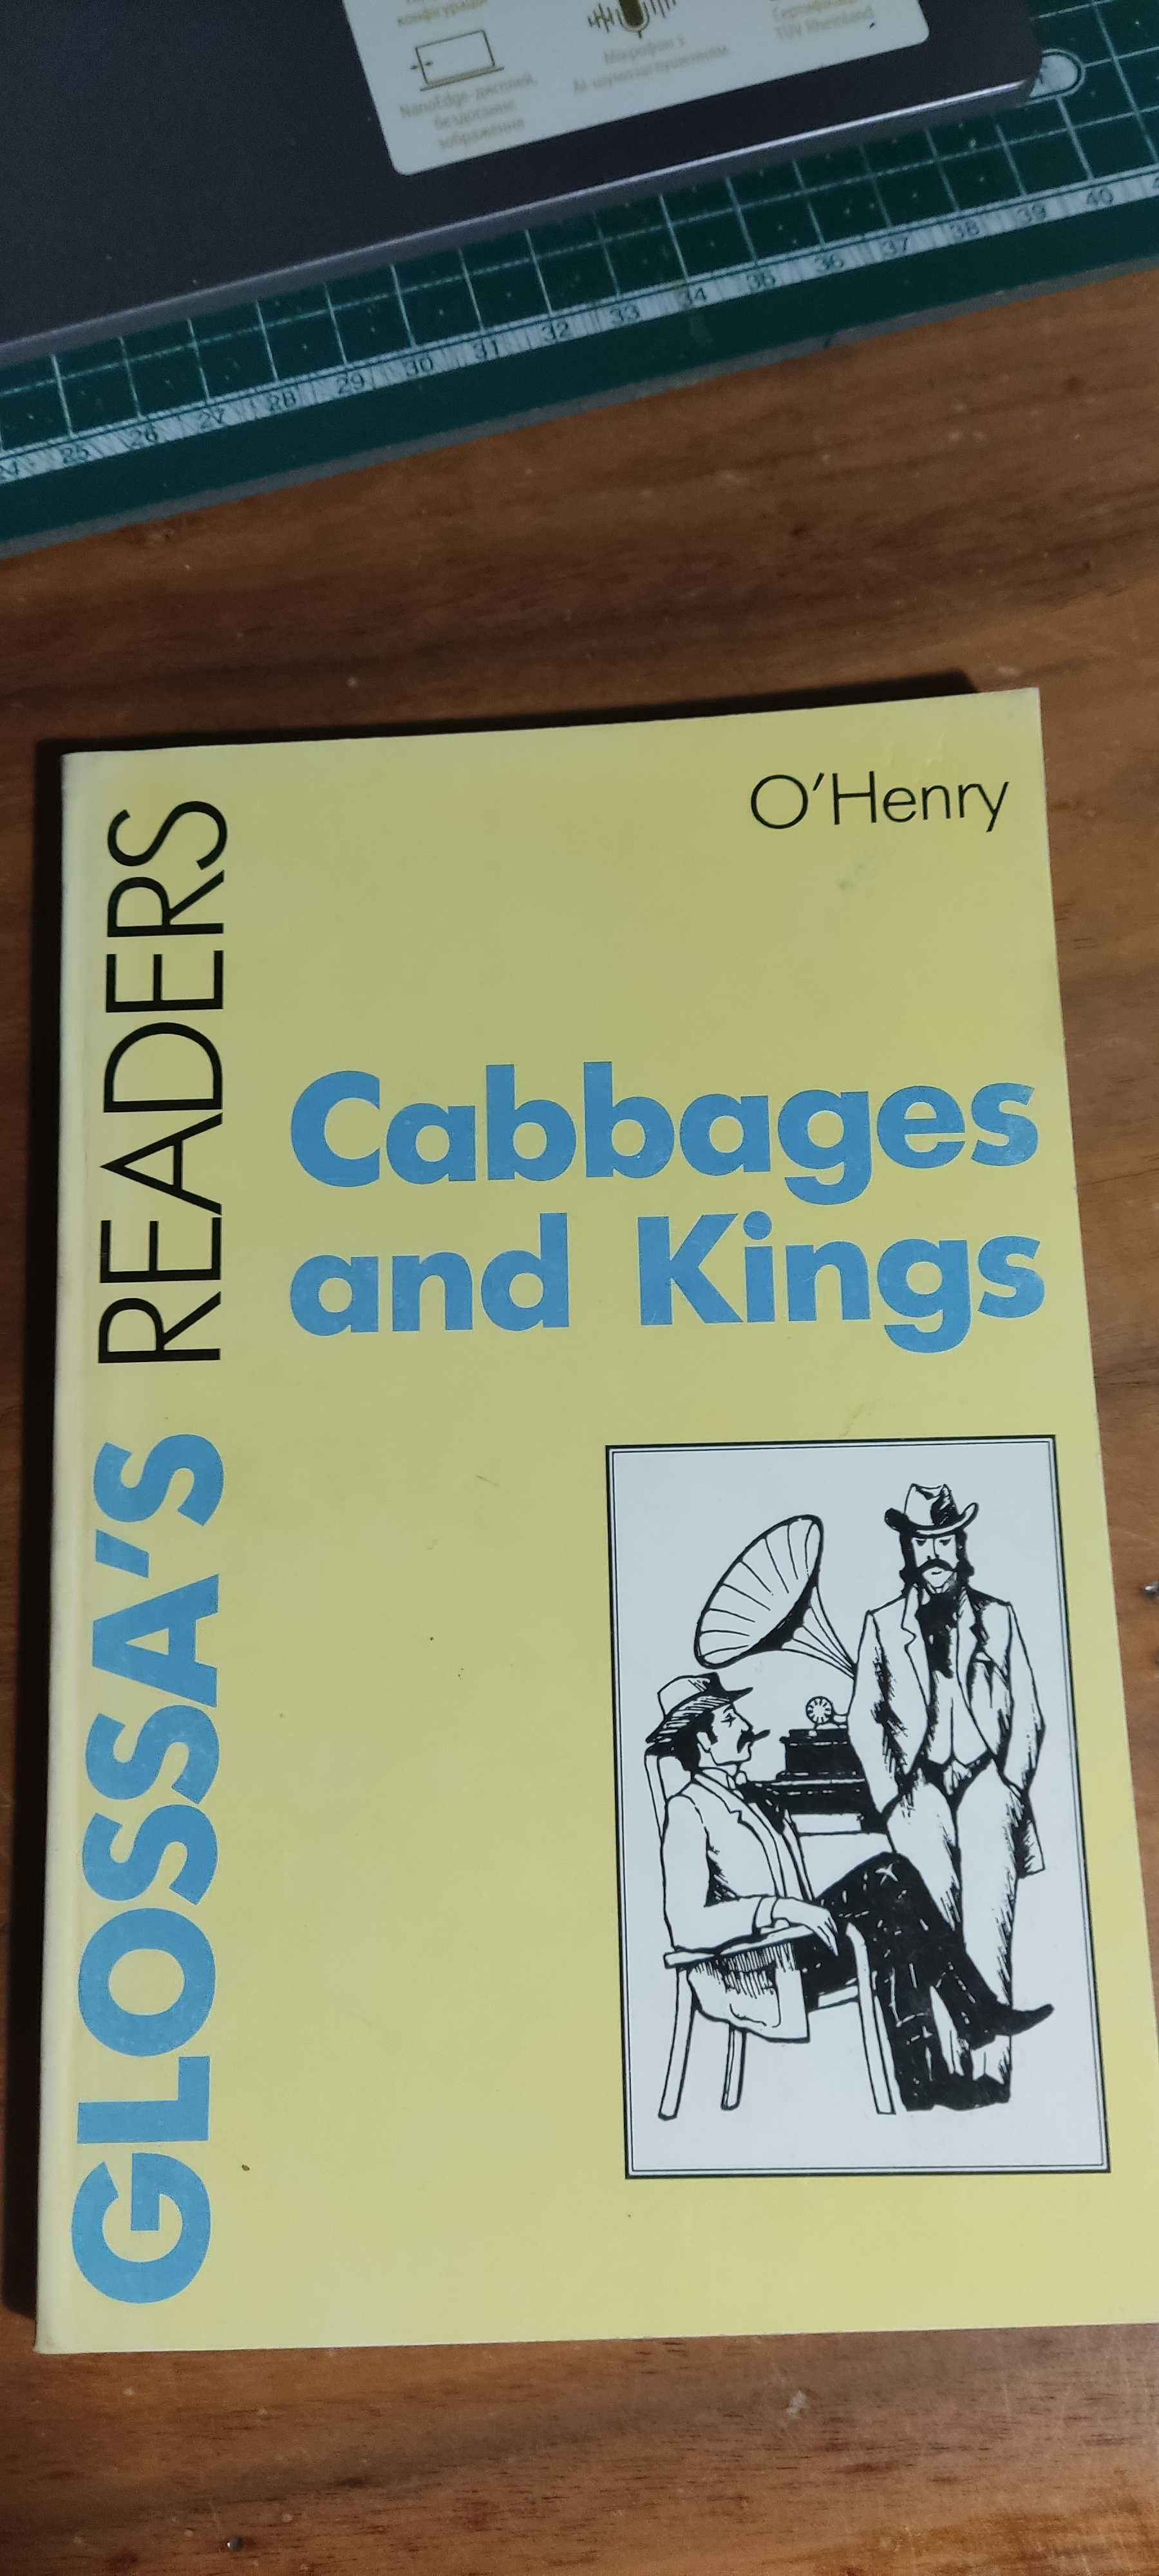 O`Henry О.Генри., Cabbages and Kings. Короли и капуста